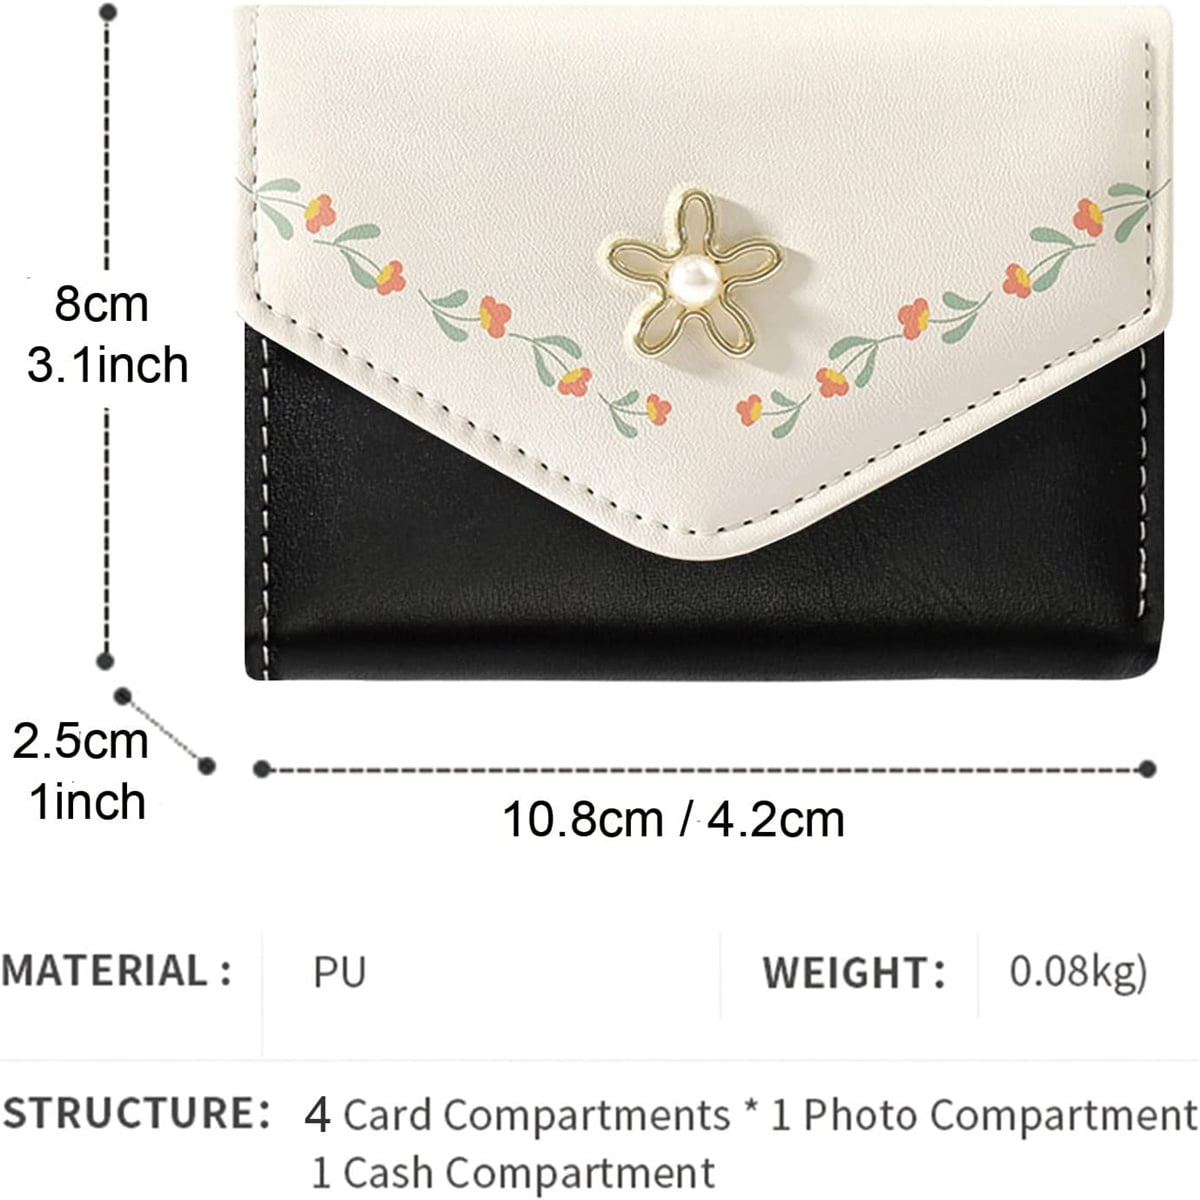 Kuifang Girls Cute Flowers Print Wallet, Small Tri-folded Aesthetic Wallet, PU Leather Purse Cash Pocket Card Holder ID Window Purse for Women(Pink)